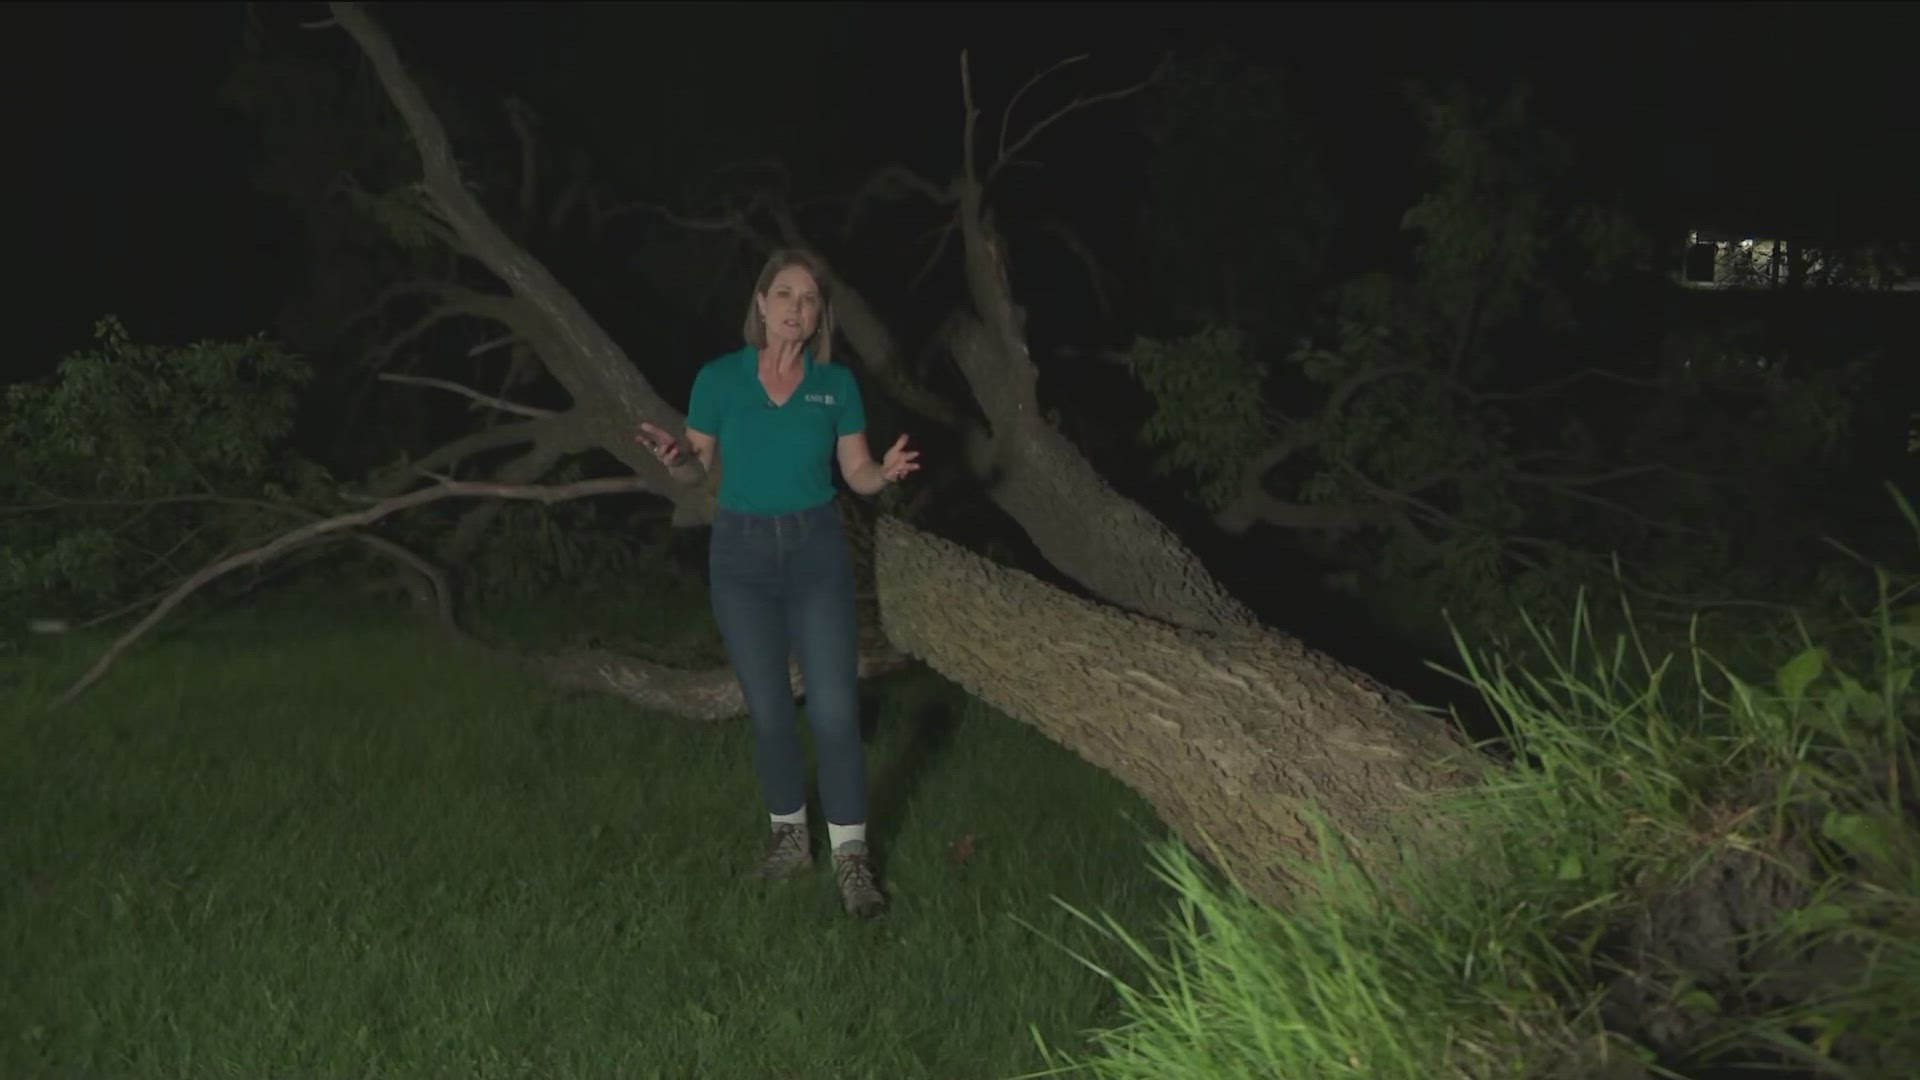 Heavy rains have caused flooding along the Mississippi River with trees uprooted because the ground is so saturated.